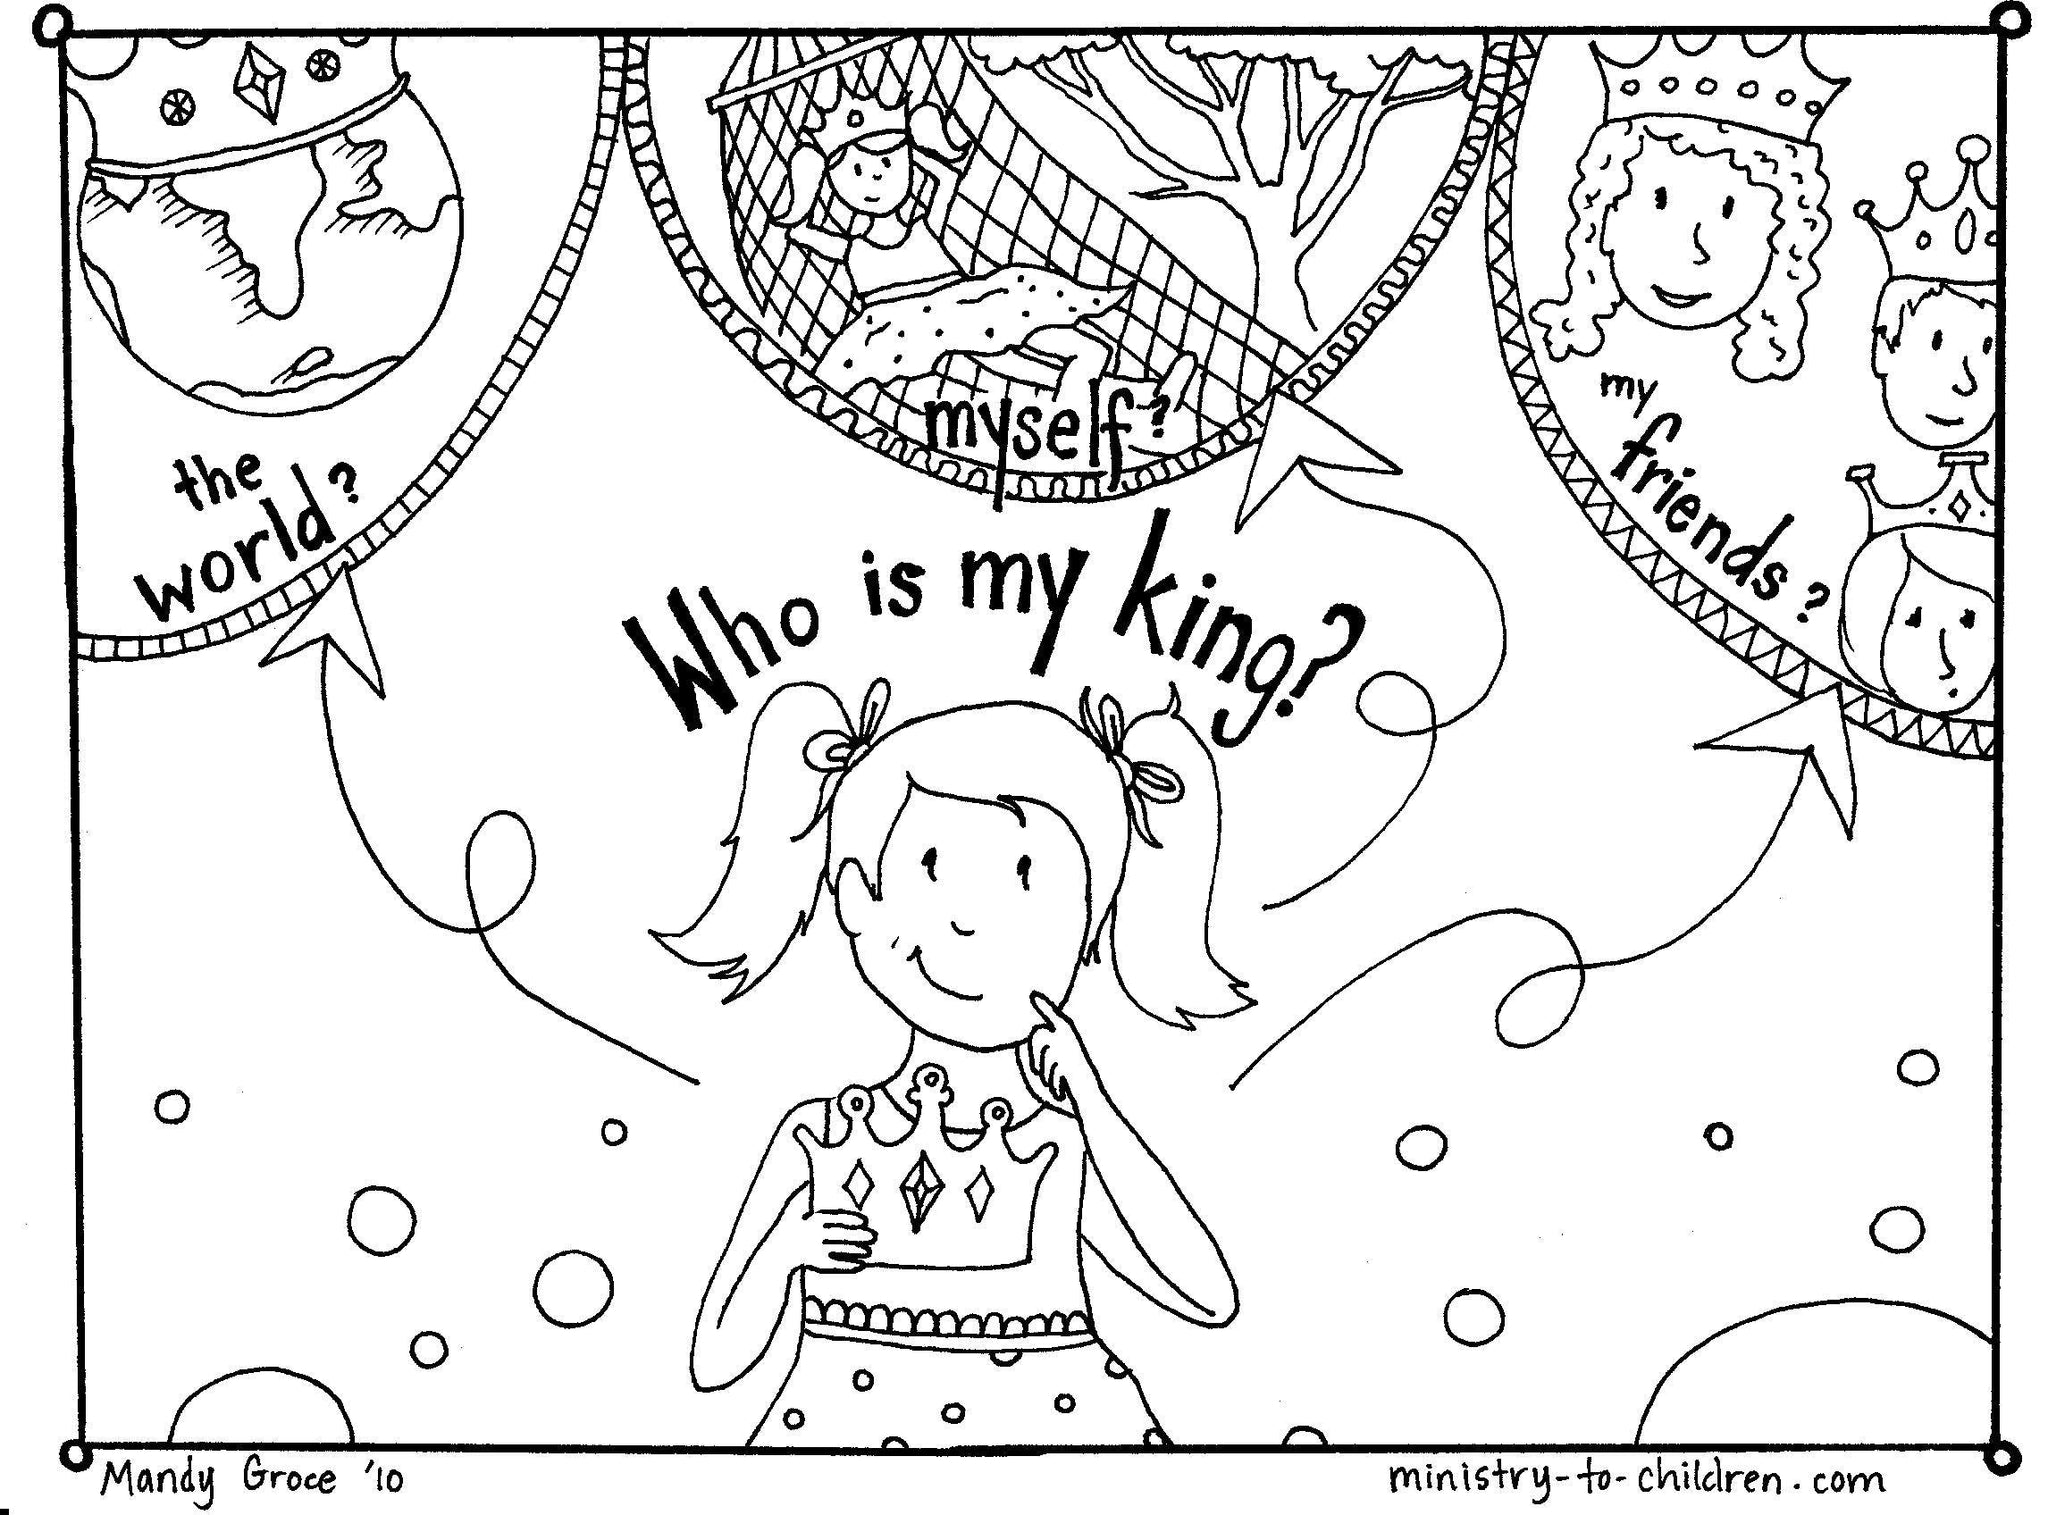 Jesus is my King: 5-Page Coloring Book (FREE) download only – The